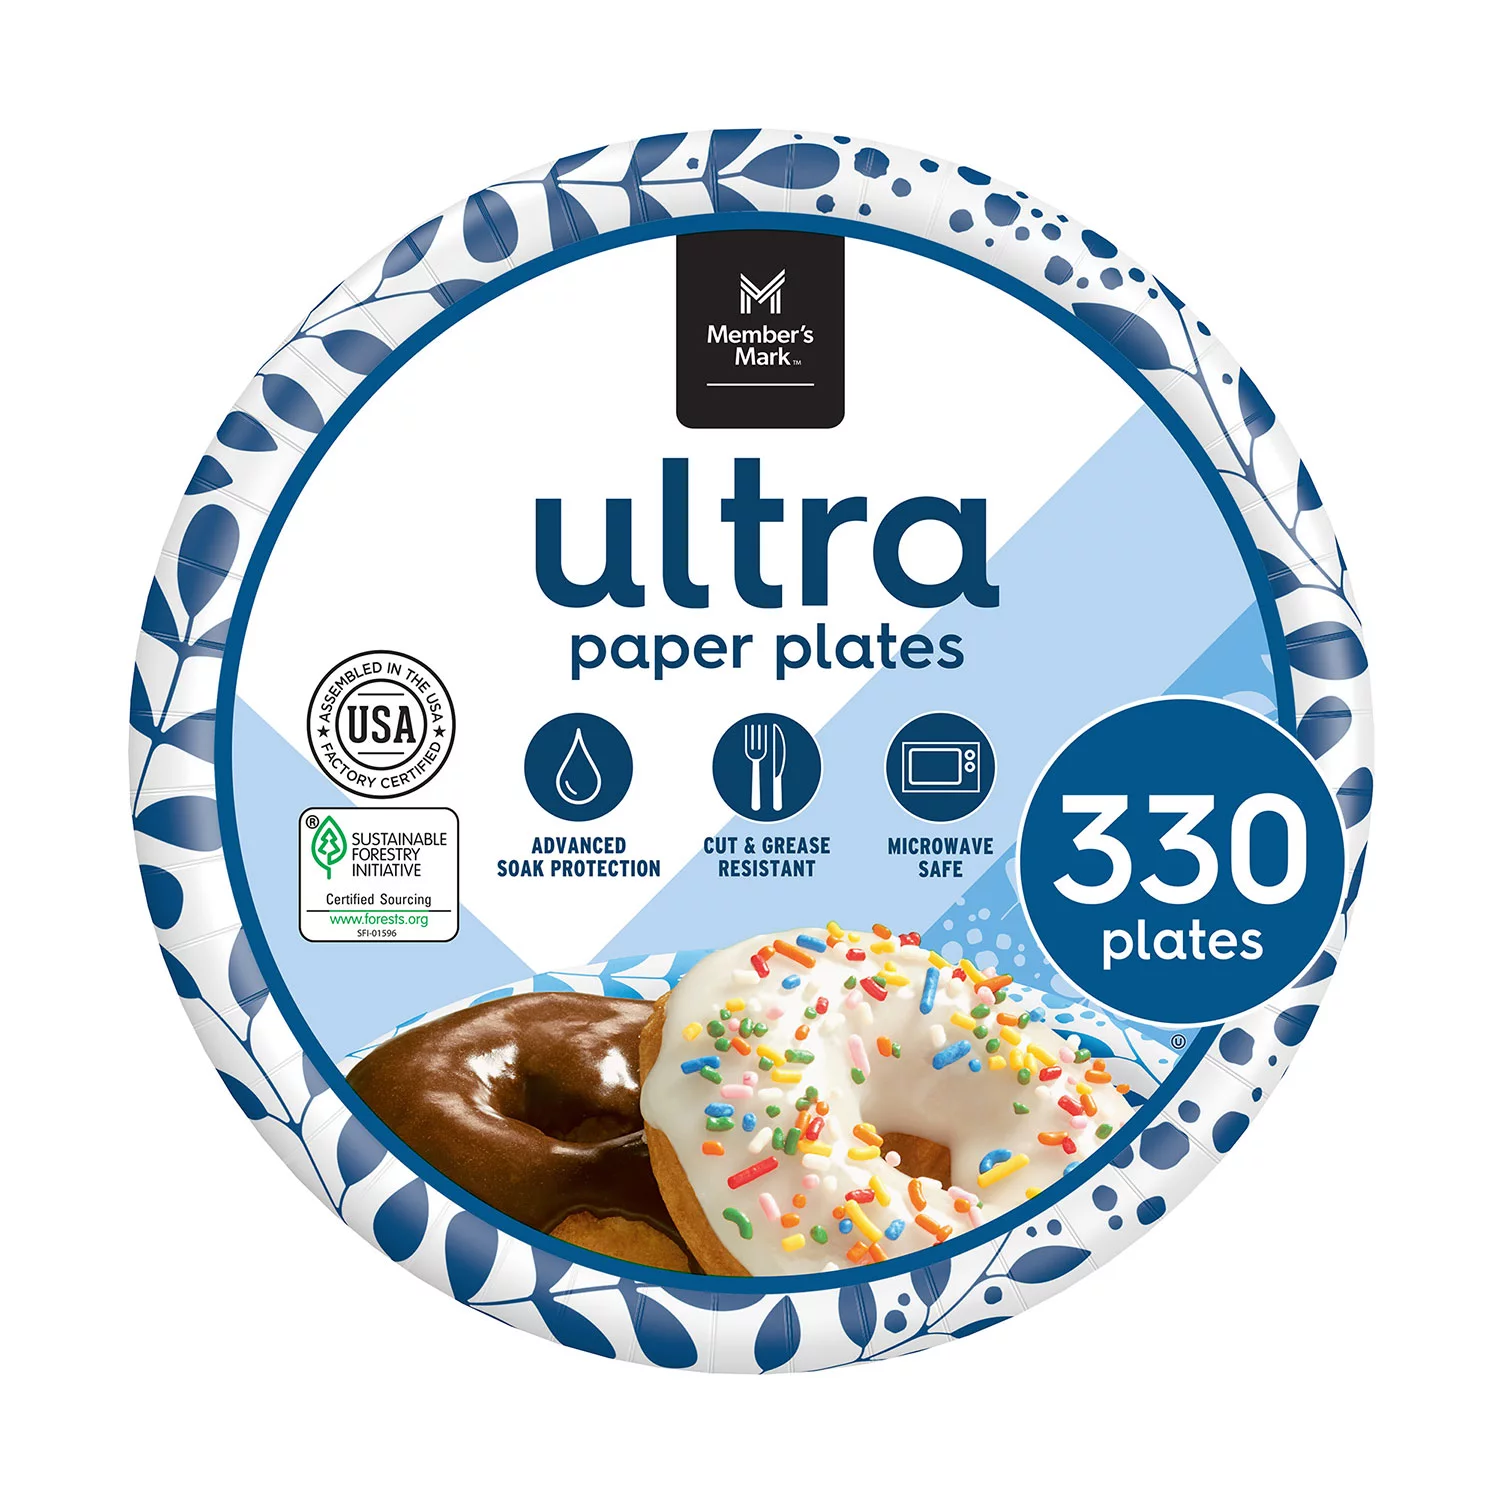 Member's Mark Ultra Dessert and Snack Paper Plates, 6.875", 330 ct.